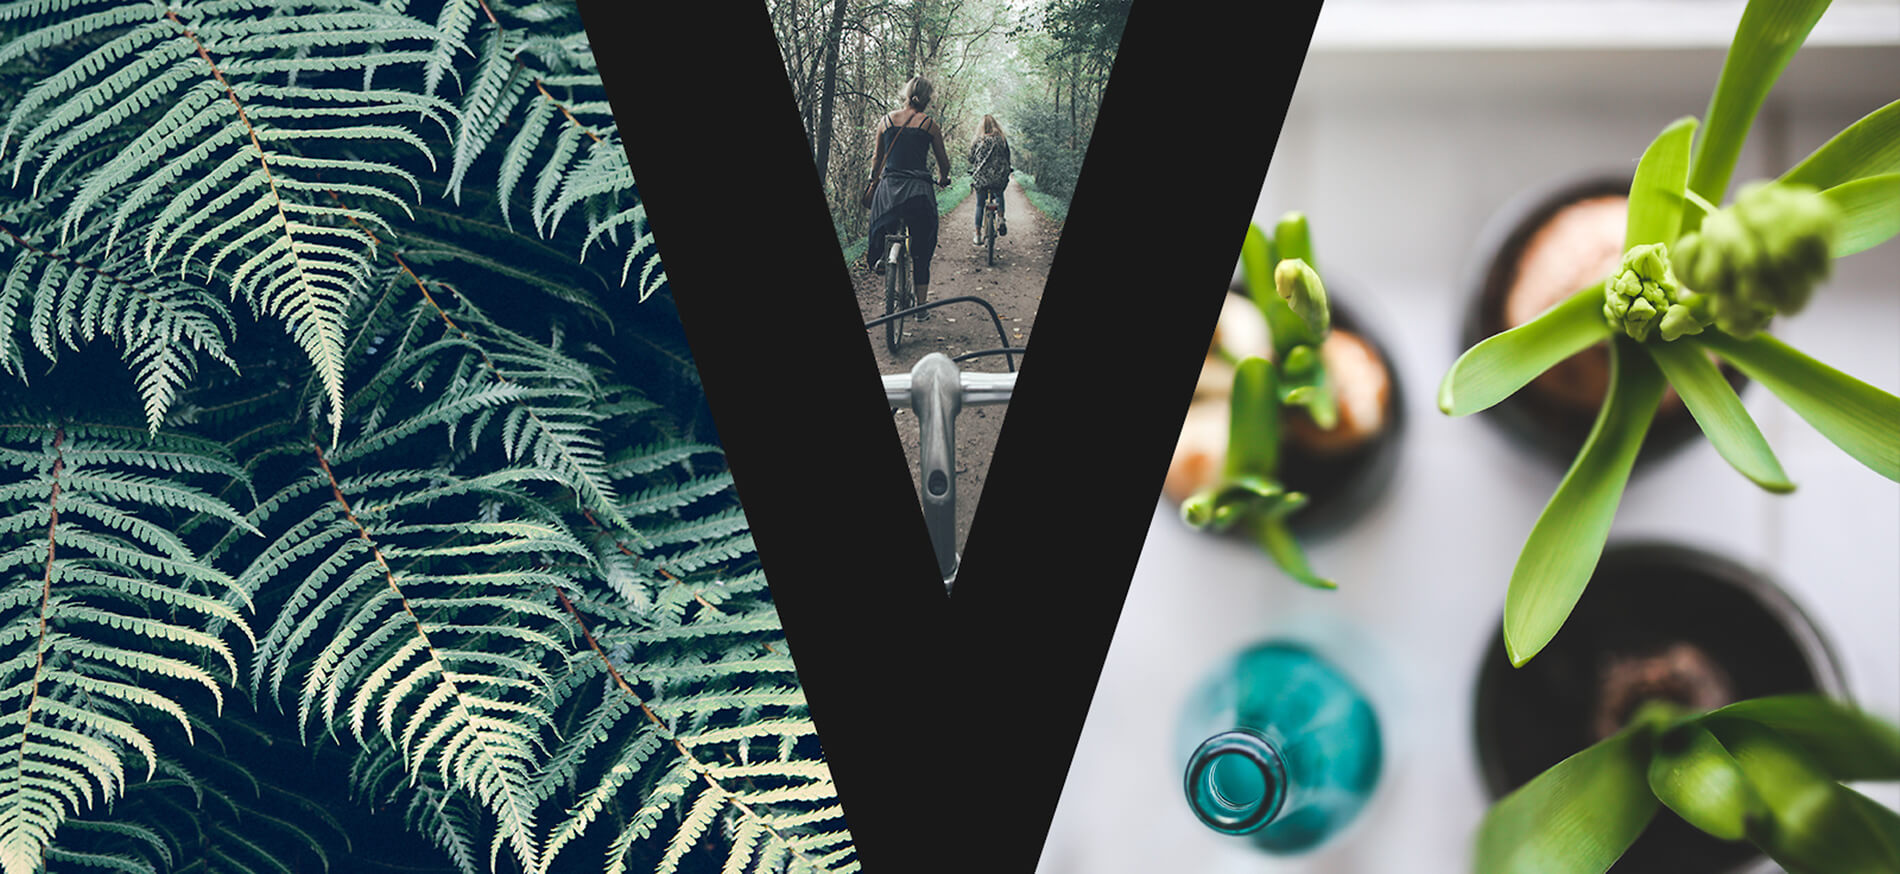 Verve collage with plants and people biking on wooded path